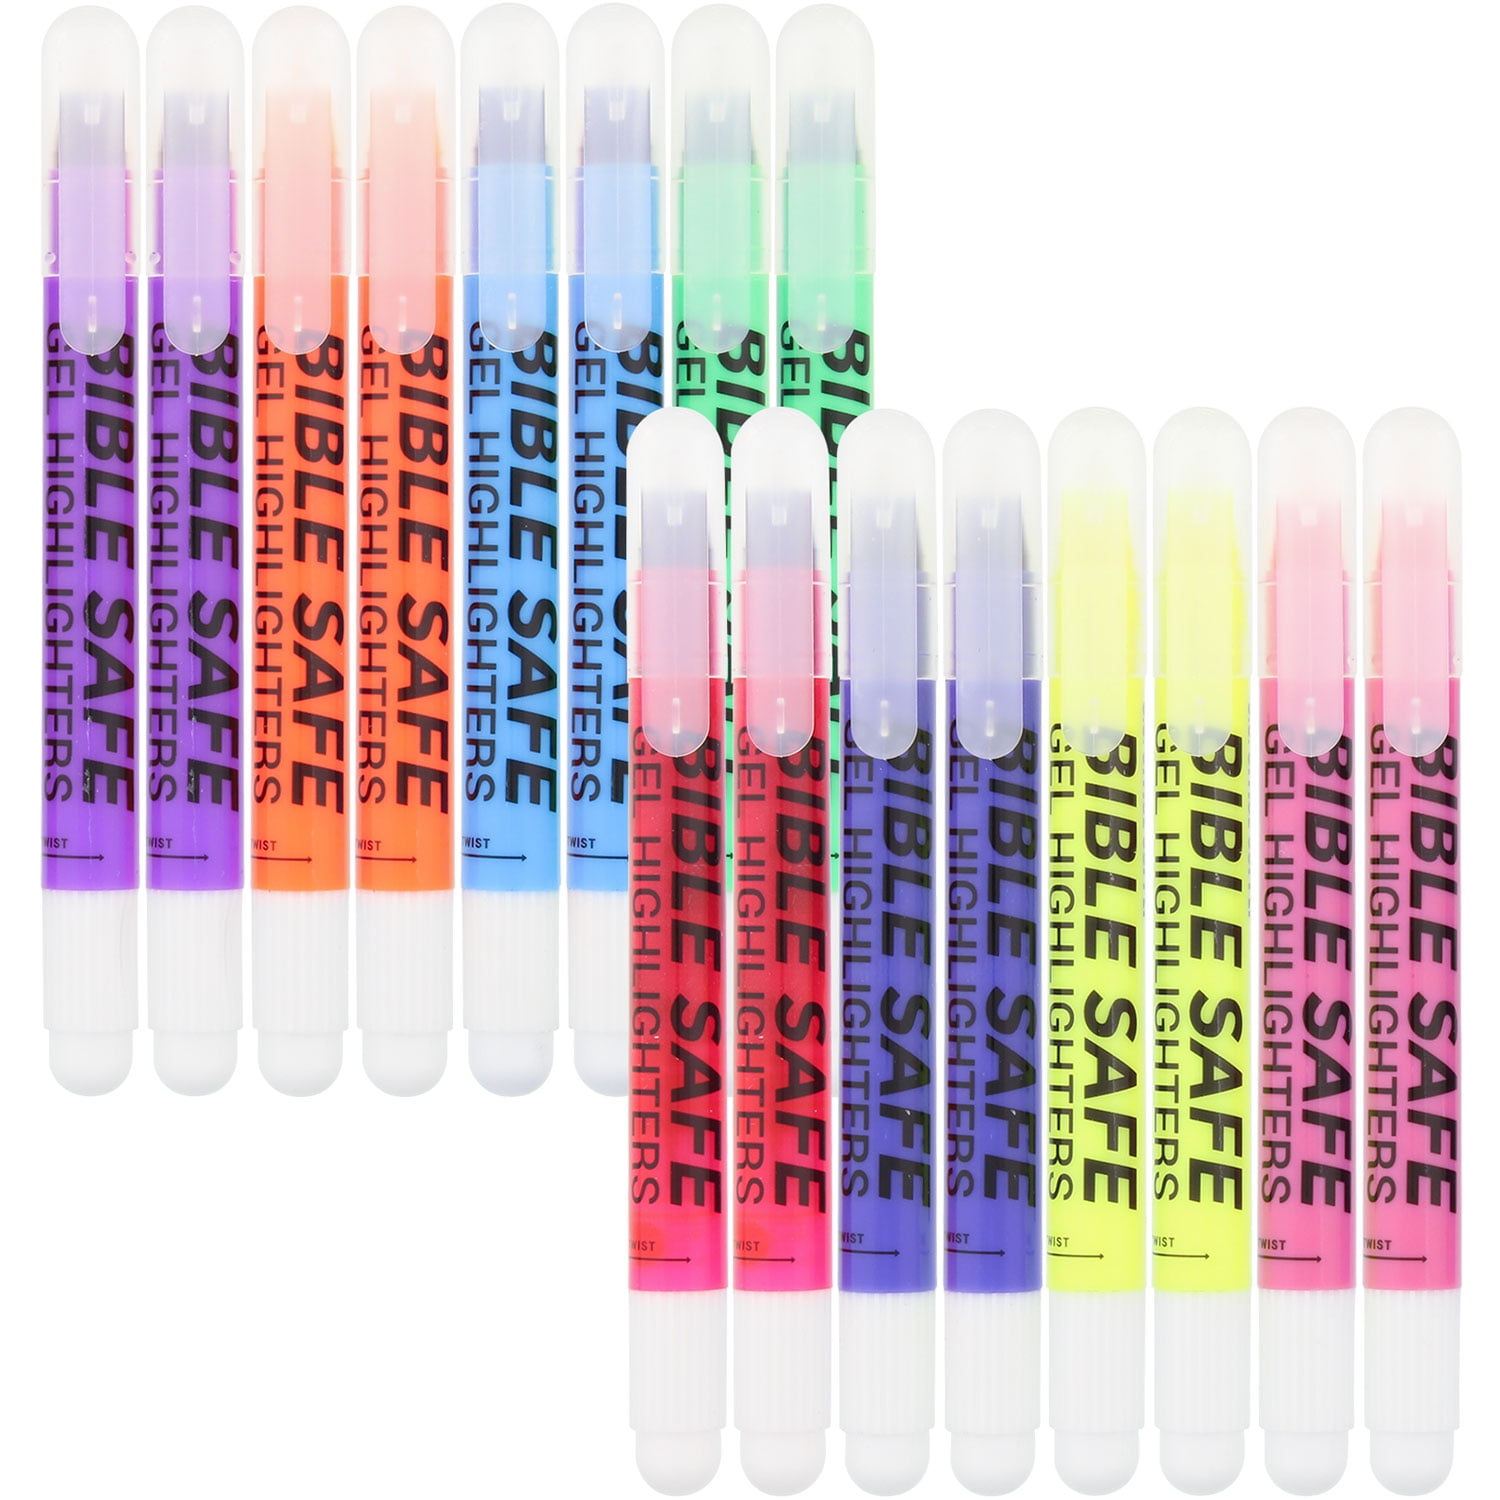  lixuesong Bible Highlighter Marker 6/12 Colors Set For Durable  And Smudge-Proof Writing And Coloring Markers Bible Markers Highlighter  Pens : Office Products